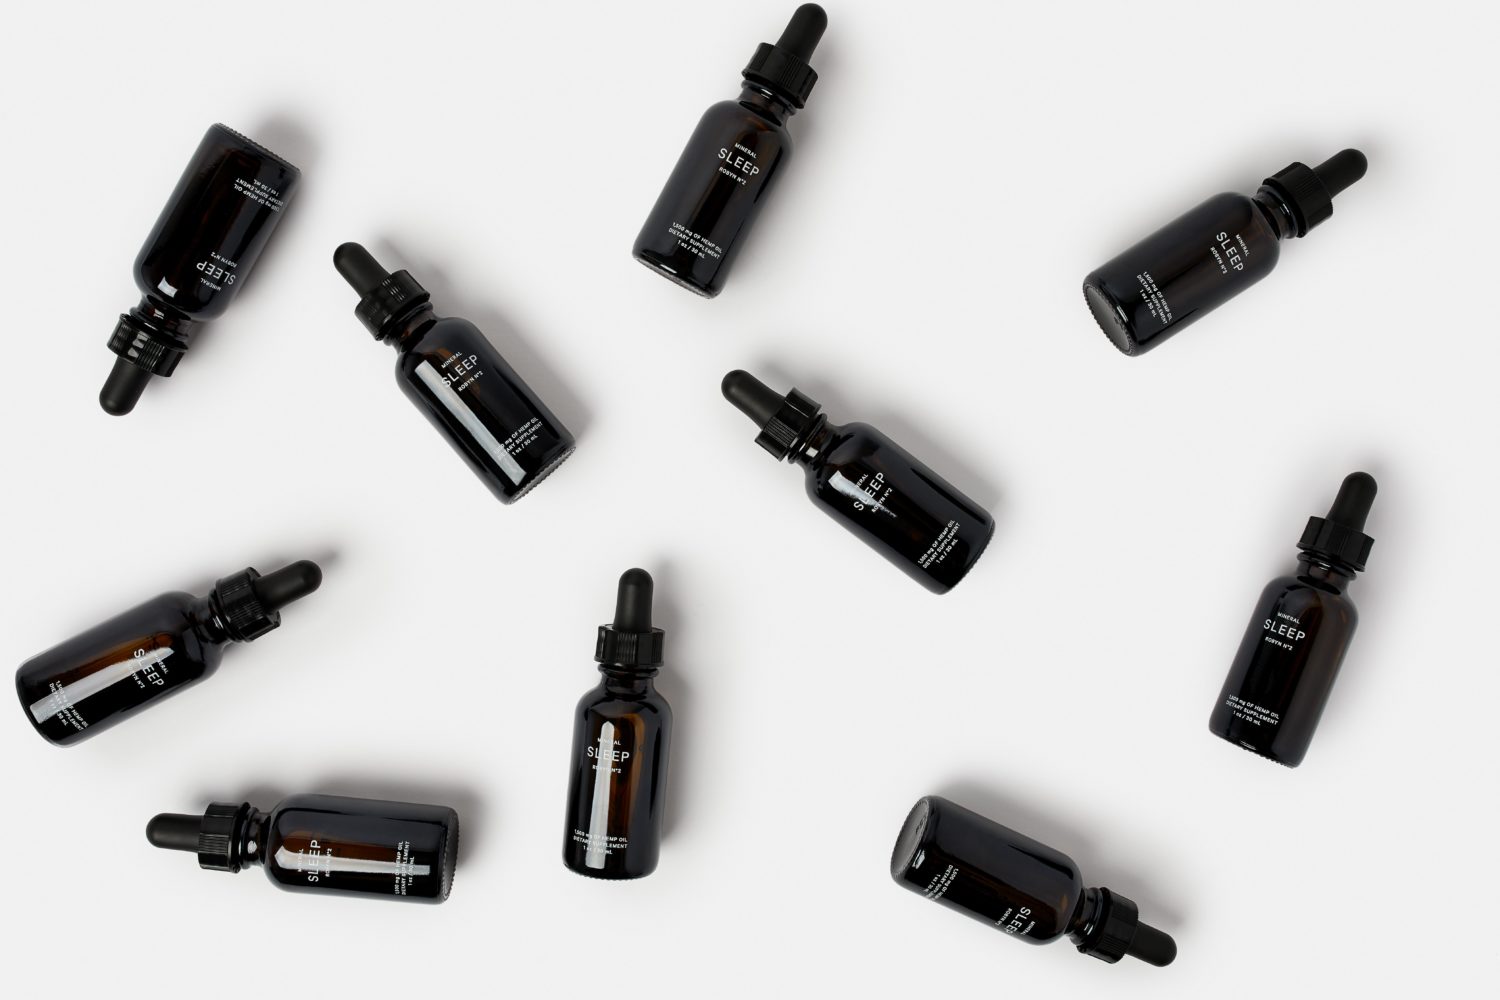 MINERAL Offers CBD Sleep Products That Could Improve Your Health | Uncustomary